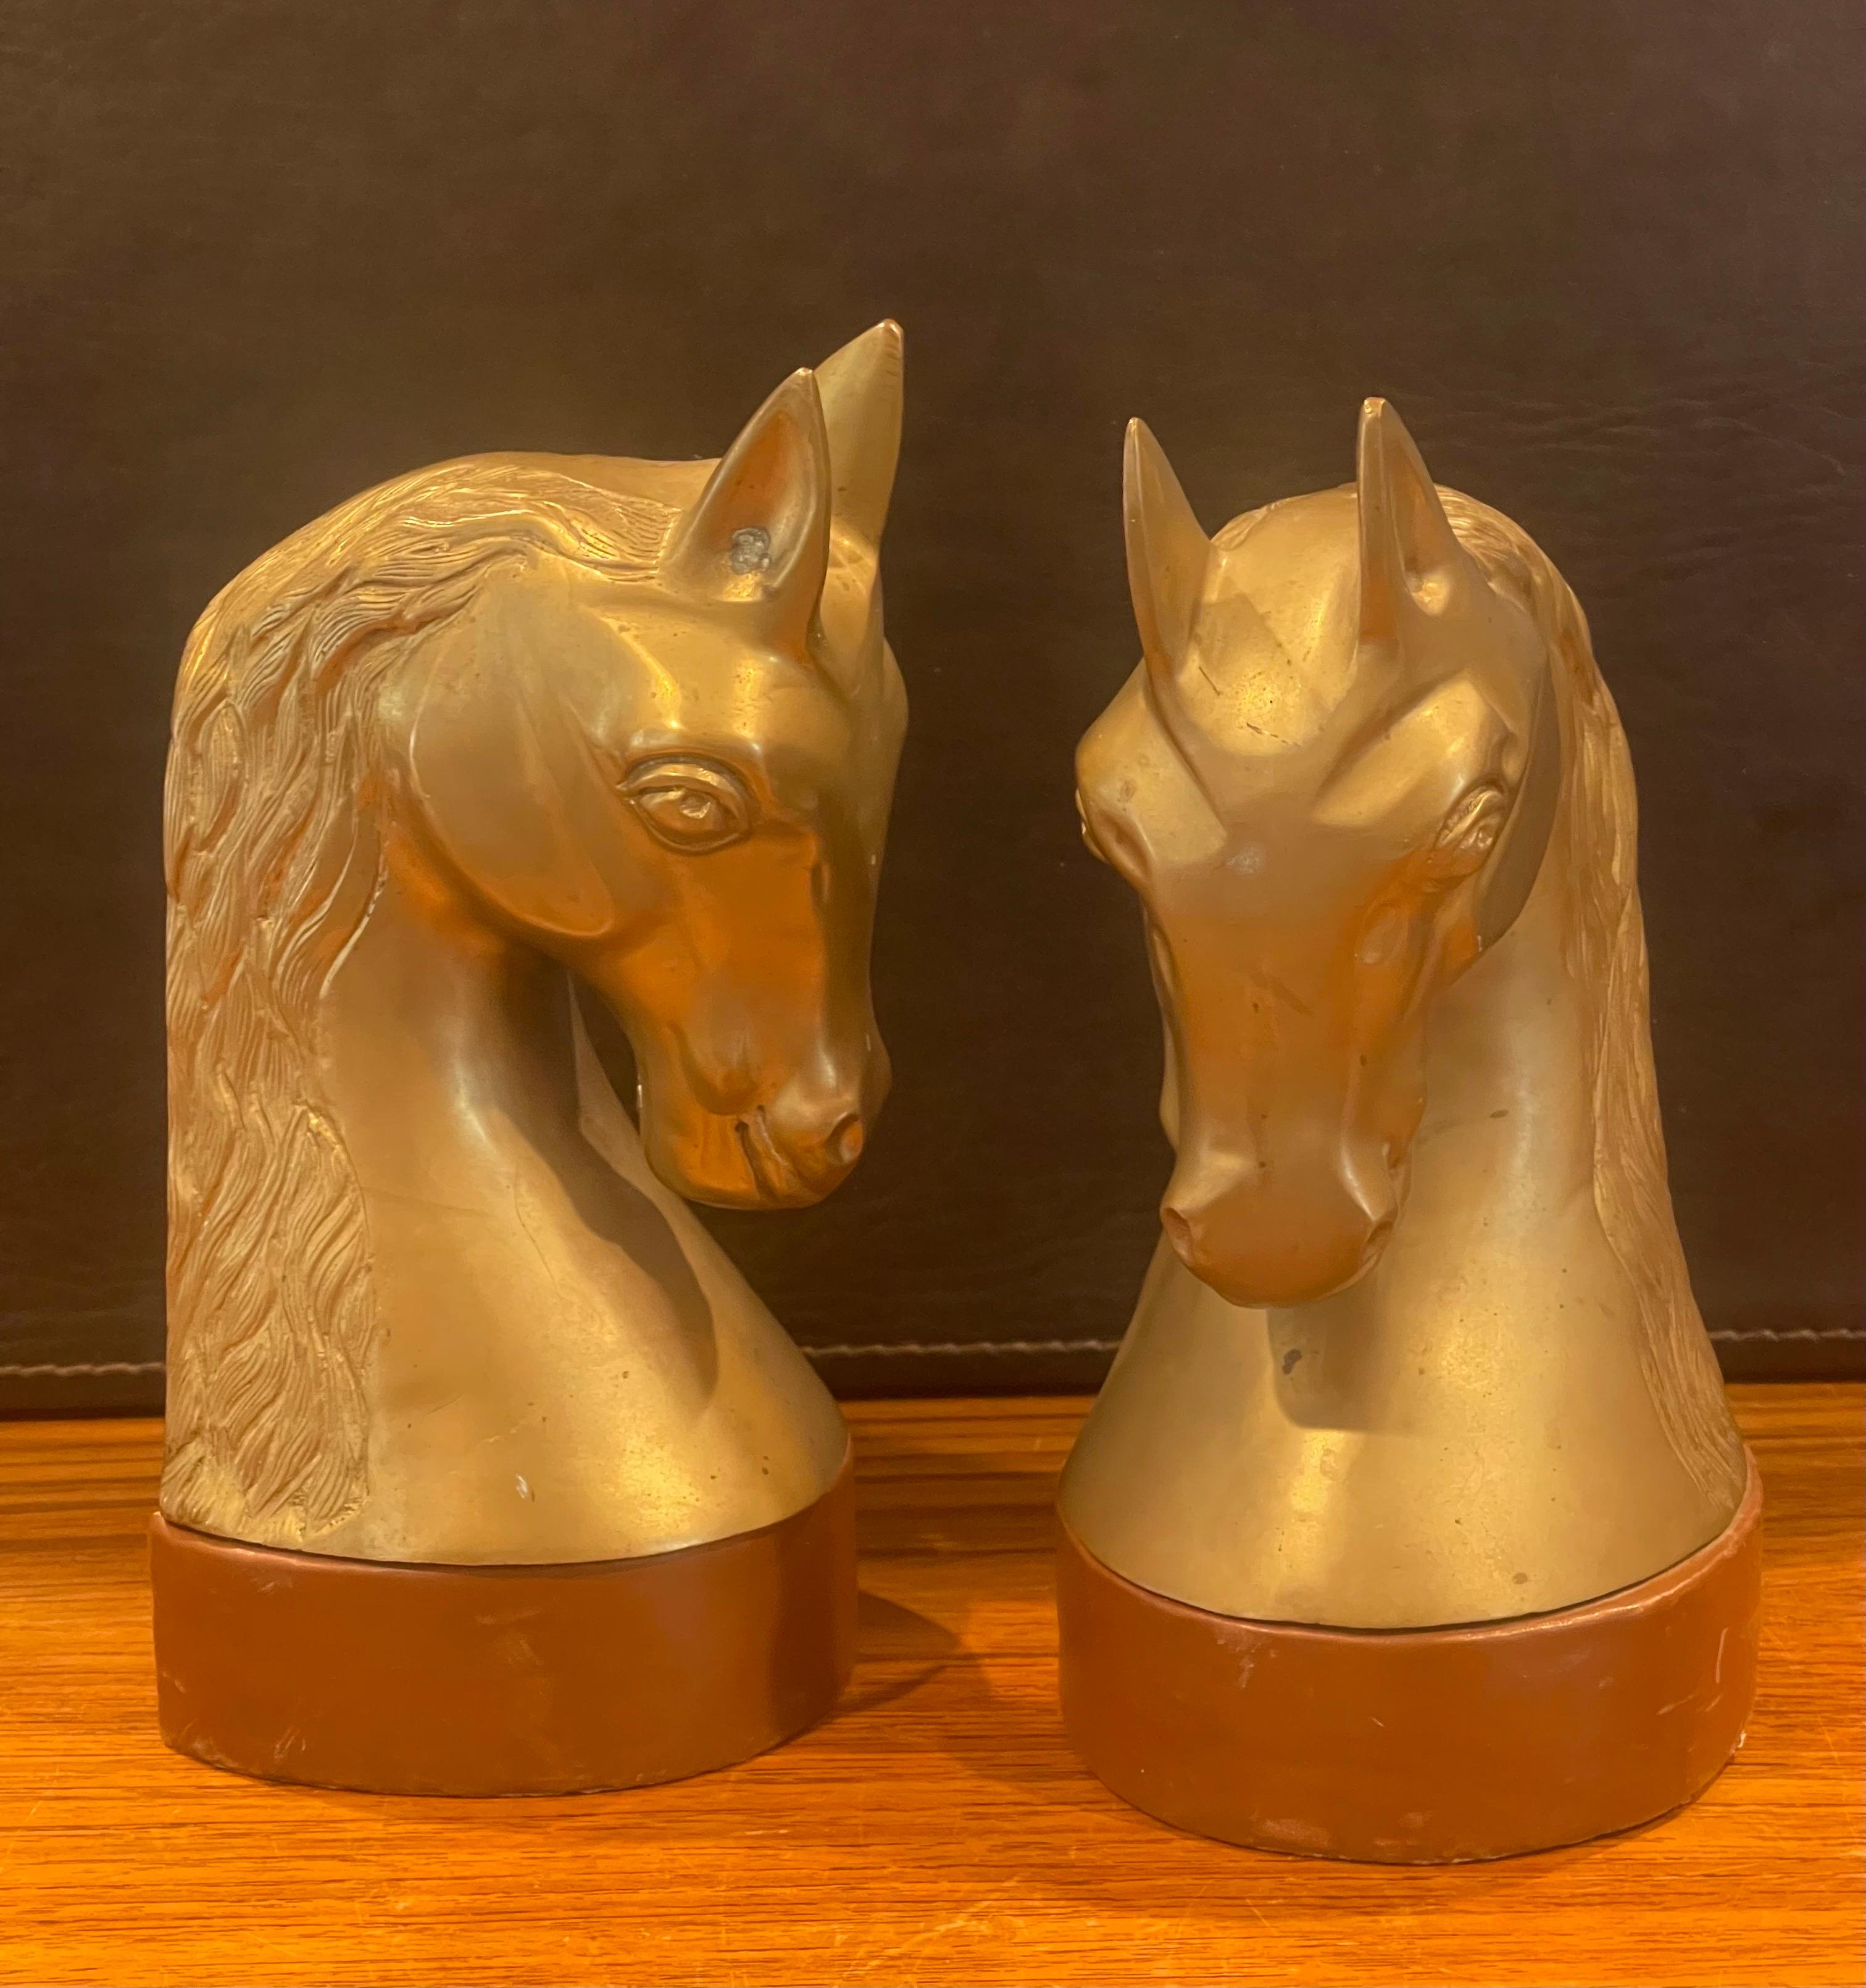 Striking pair of vintage brass and leather horse head bookends, circa 1970s. The bookends are in good vintage condition with a beautiful patina and measure 8.25